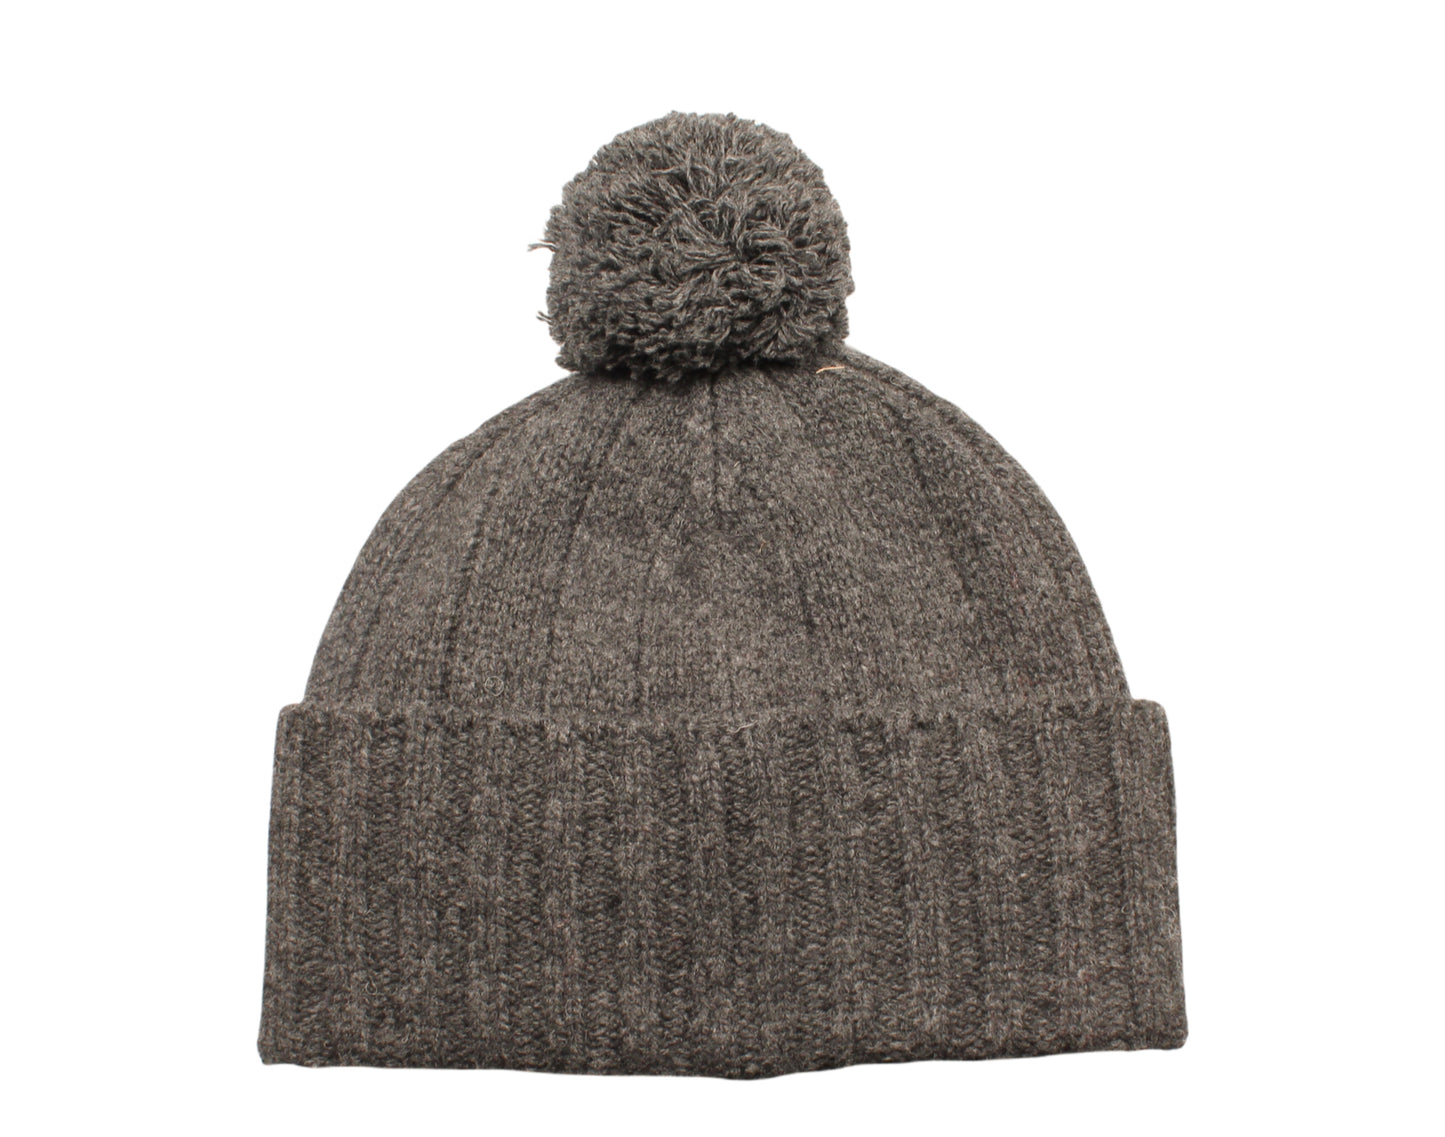 Polo Ralph Lauren Wool Expedition Pom-Pom Cuff Knit Hat